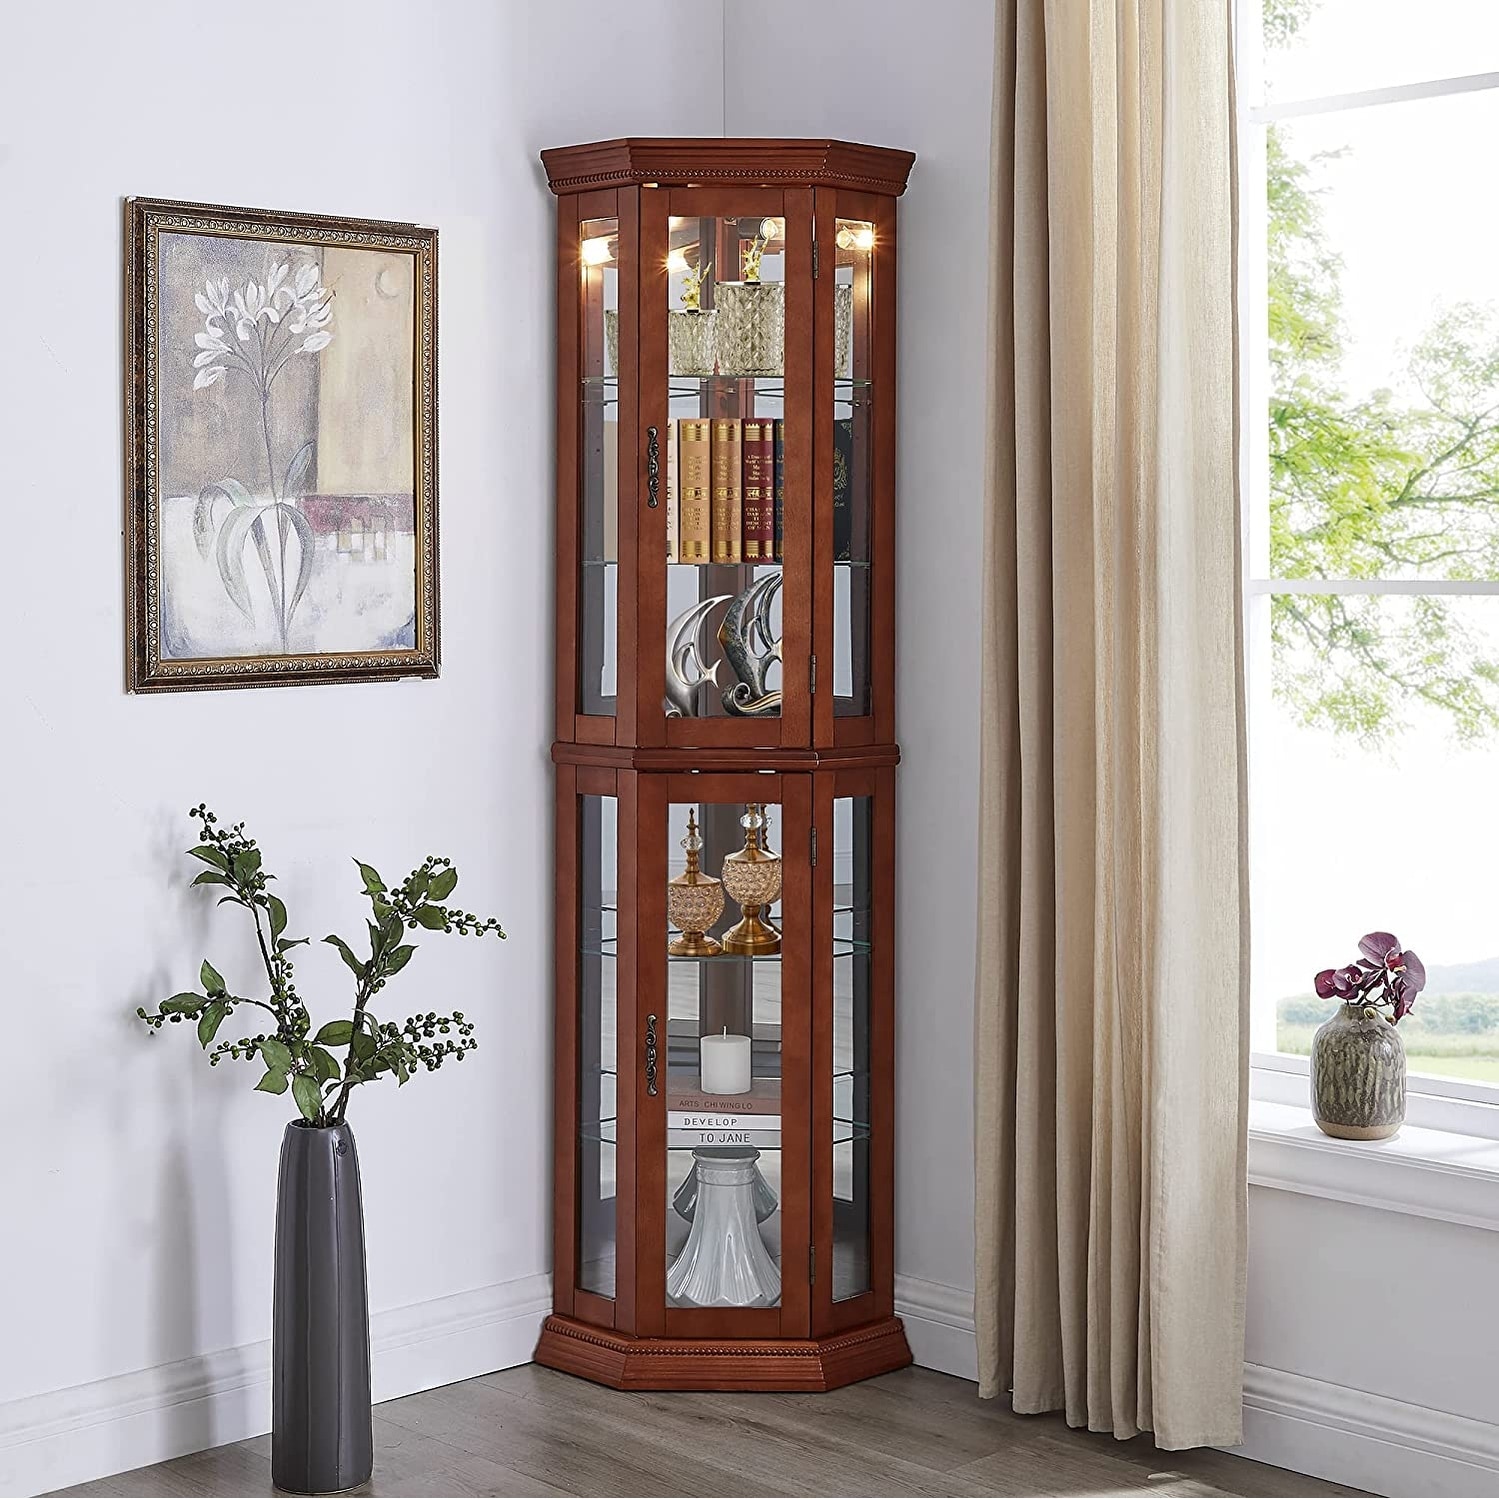 https://ak1.ostkcdn.com/images/products/is/images/direct/78c9139697c2118f8c652dd5362ff42d64f7c86a/Glass-Curio-Display-Cabinet%2C-Mid-Century-Modern-Corner-Cabinet-with-Adjustable-Shelves-and-Mirrored-Back.jpg